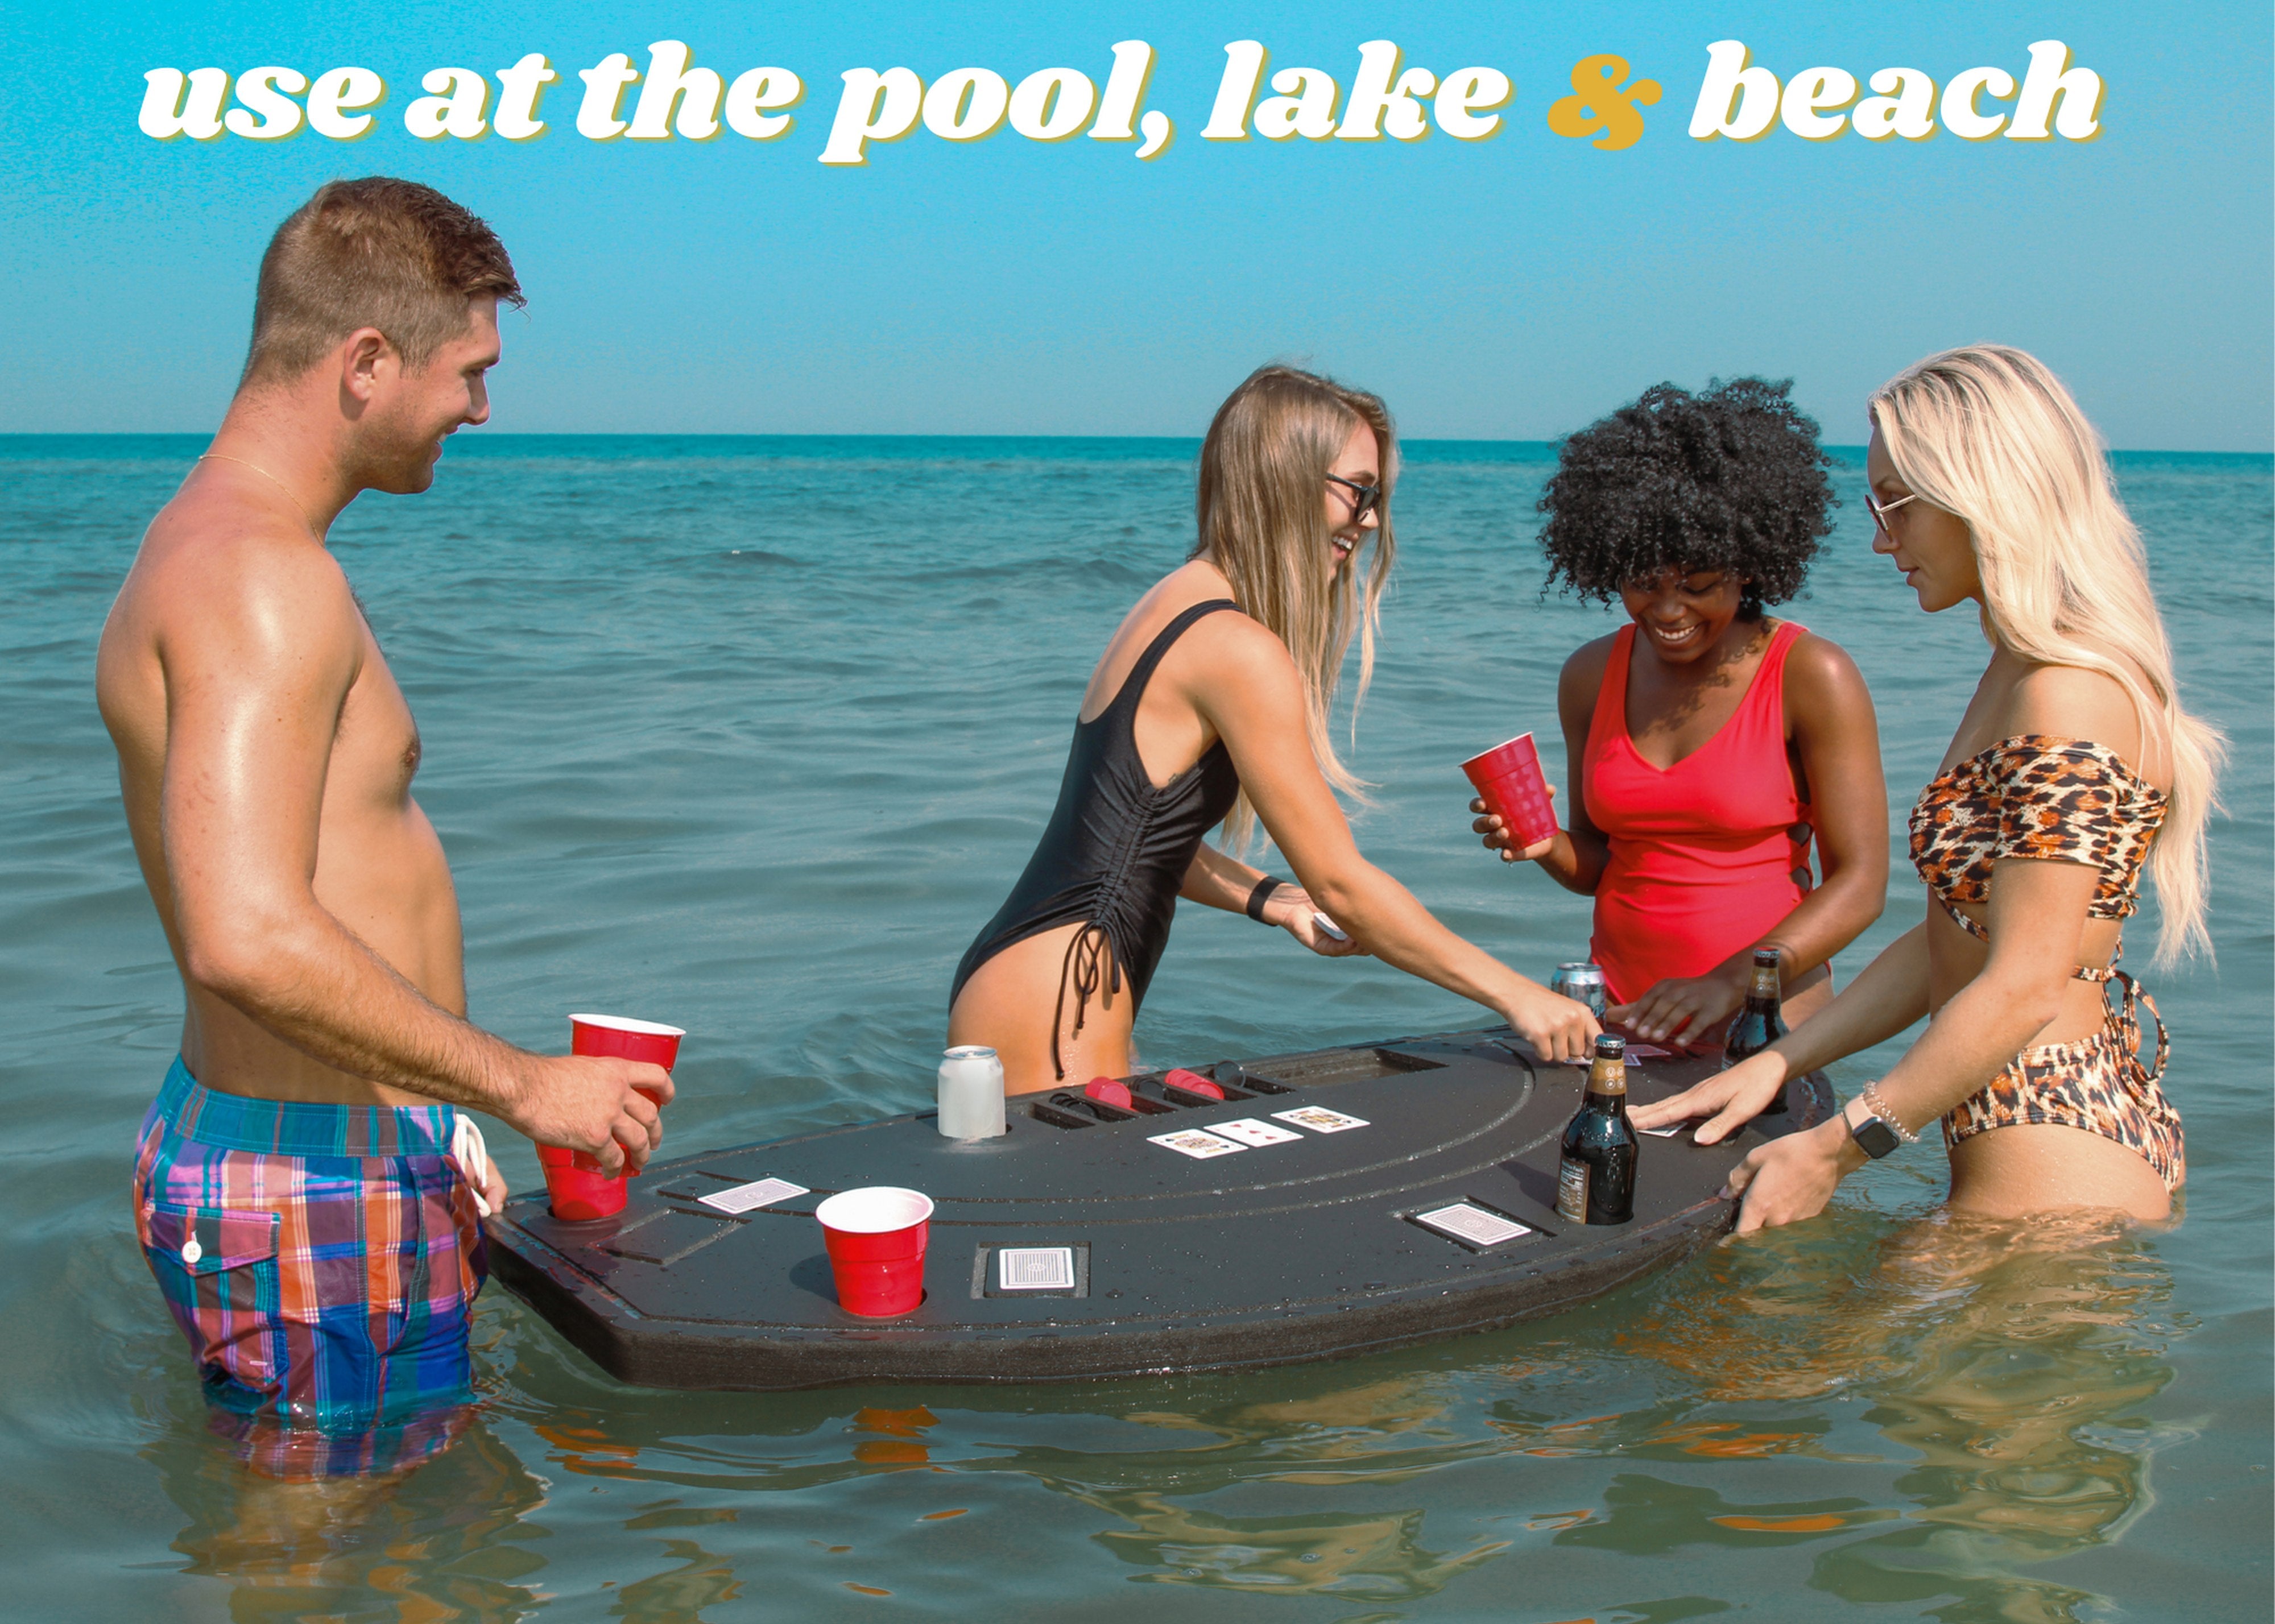 Floating Large jack Game Table Card Tray for Pool or Beach Float Lounge Durable Foam 60 Inch with Drink Holders Slots Includes Waterproof Cards